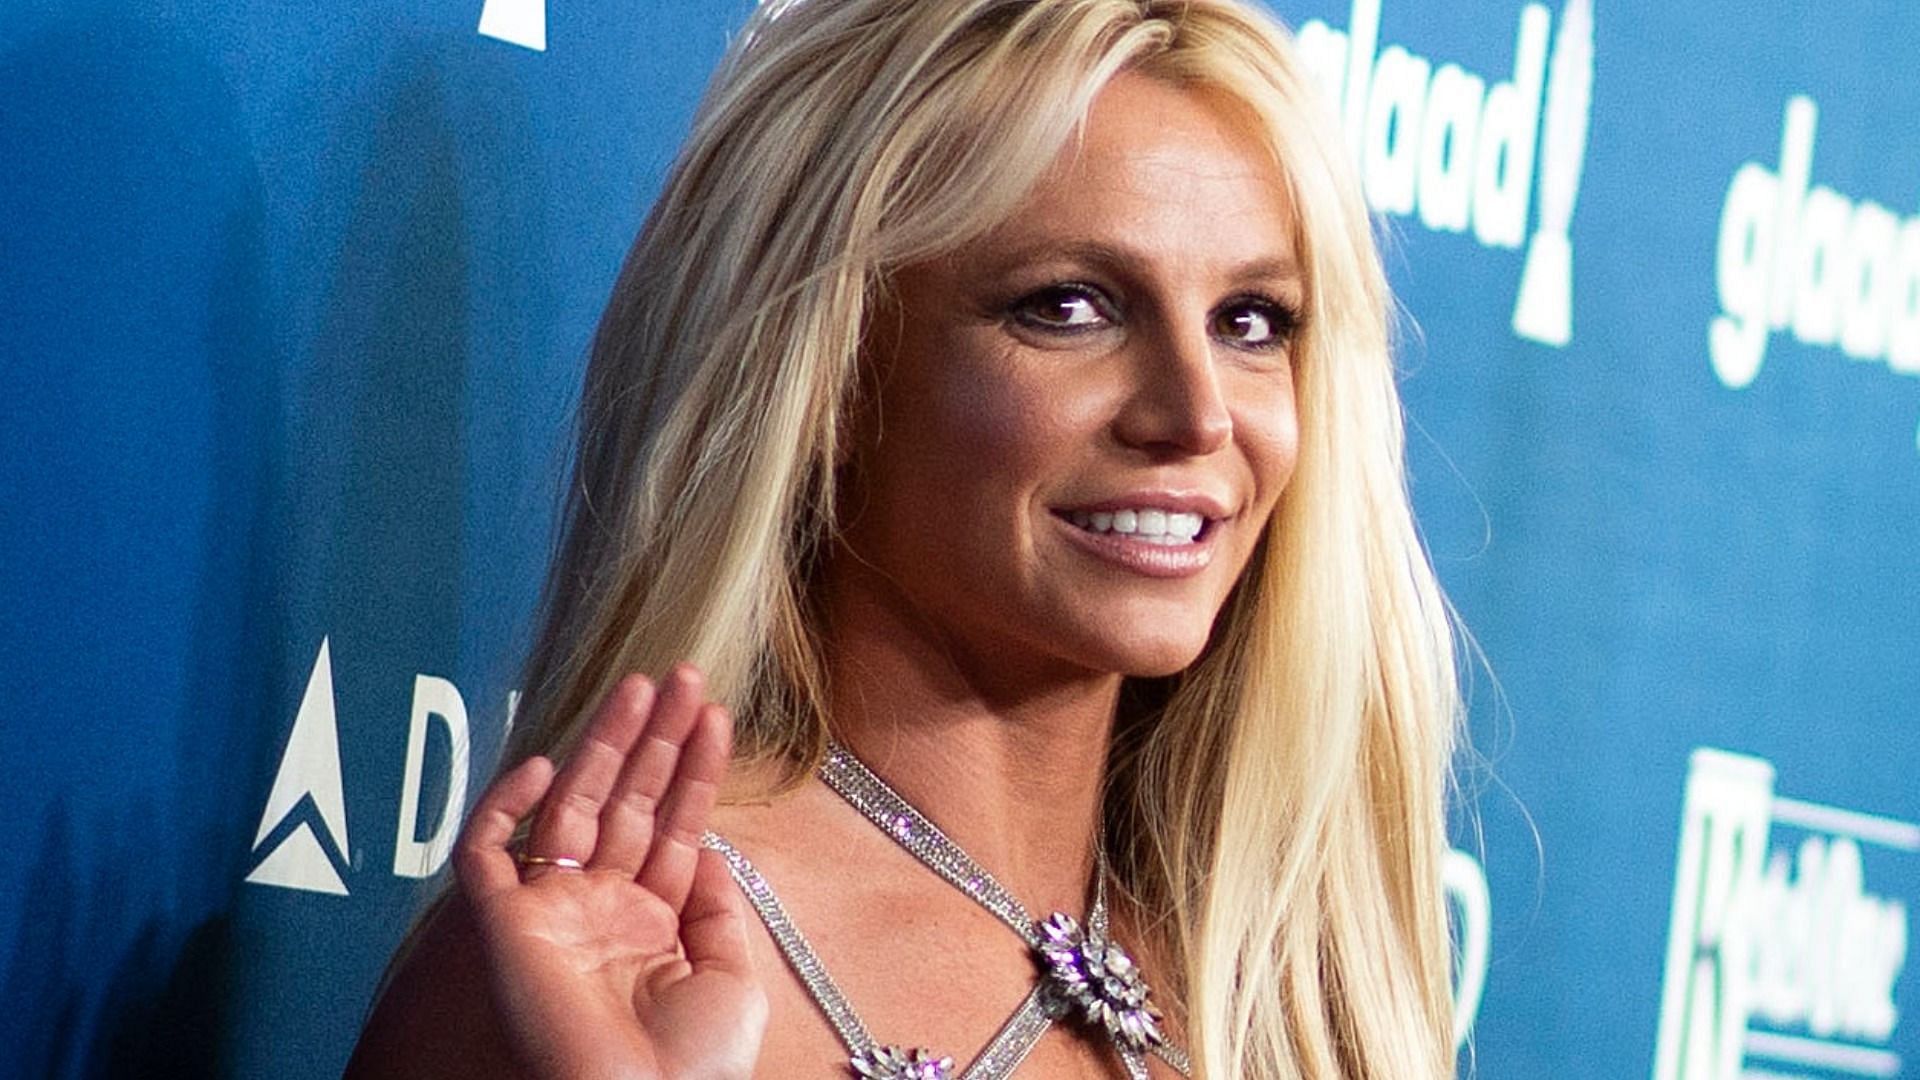 /Britney Spears has signed a huge deal with publishing house Simon &amp; Schuster for her memoir (Image via Valerie Macon/Getty Images)